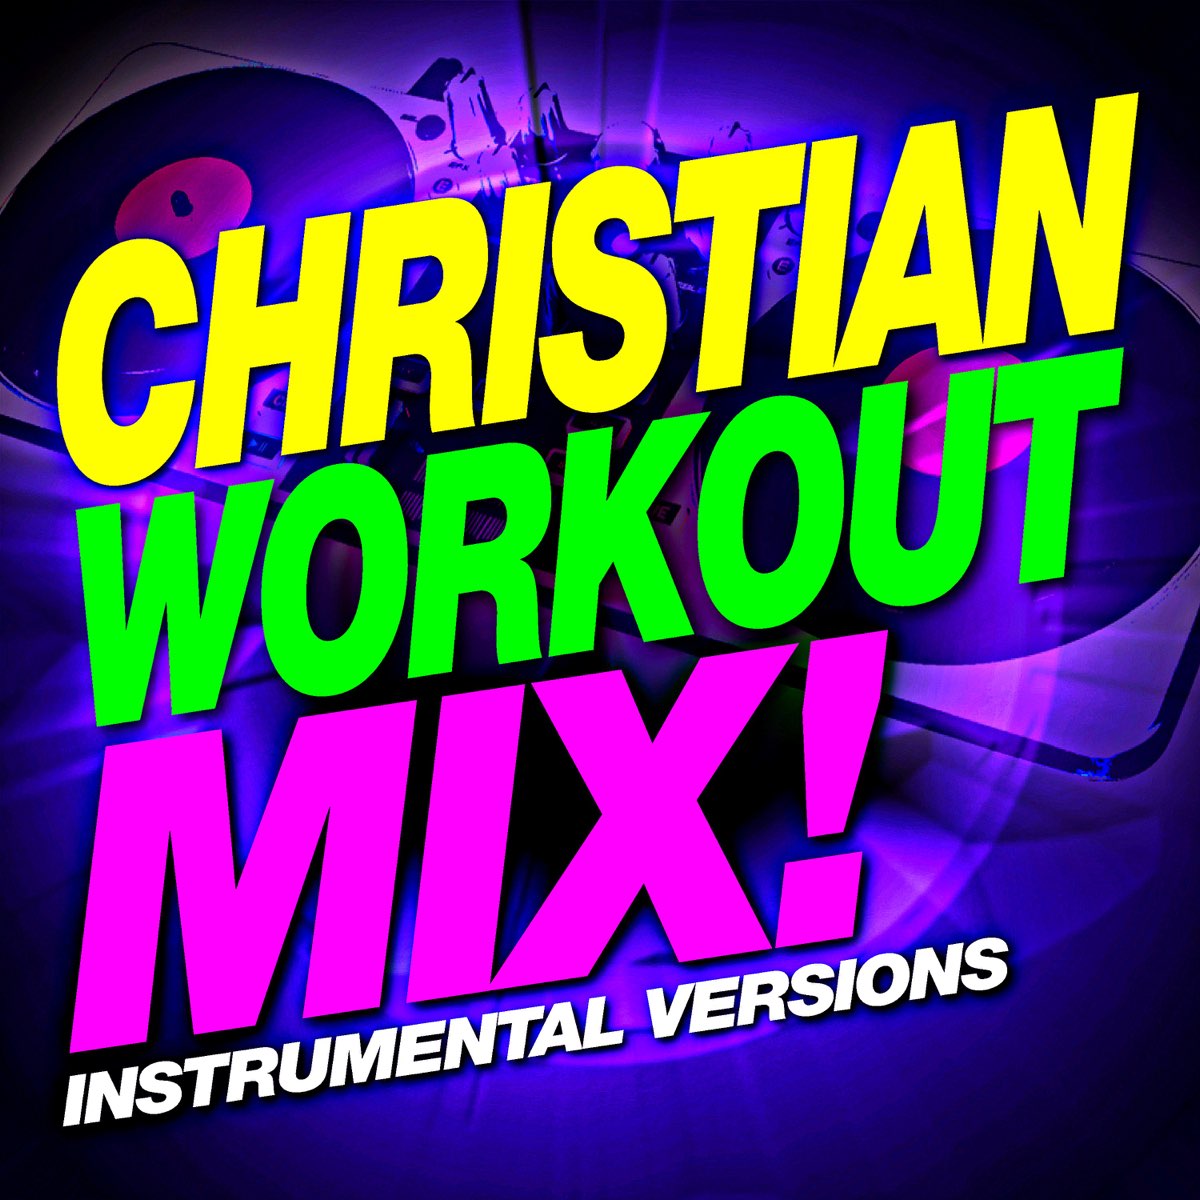 Christian Workout Mix! (Instrumental Versions) by CWH on Apple Music